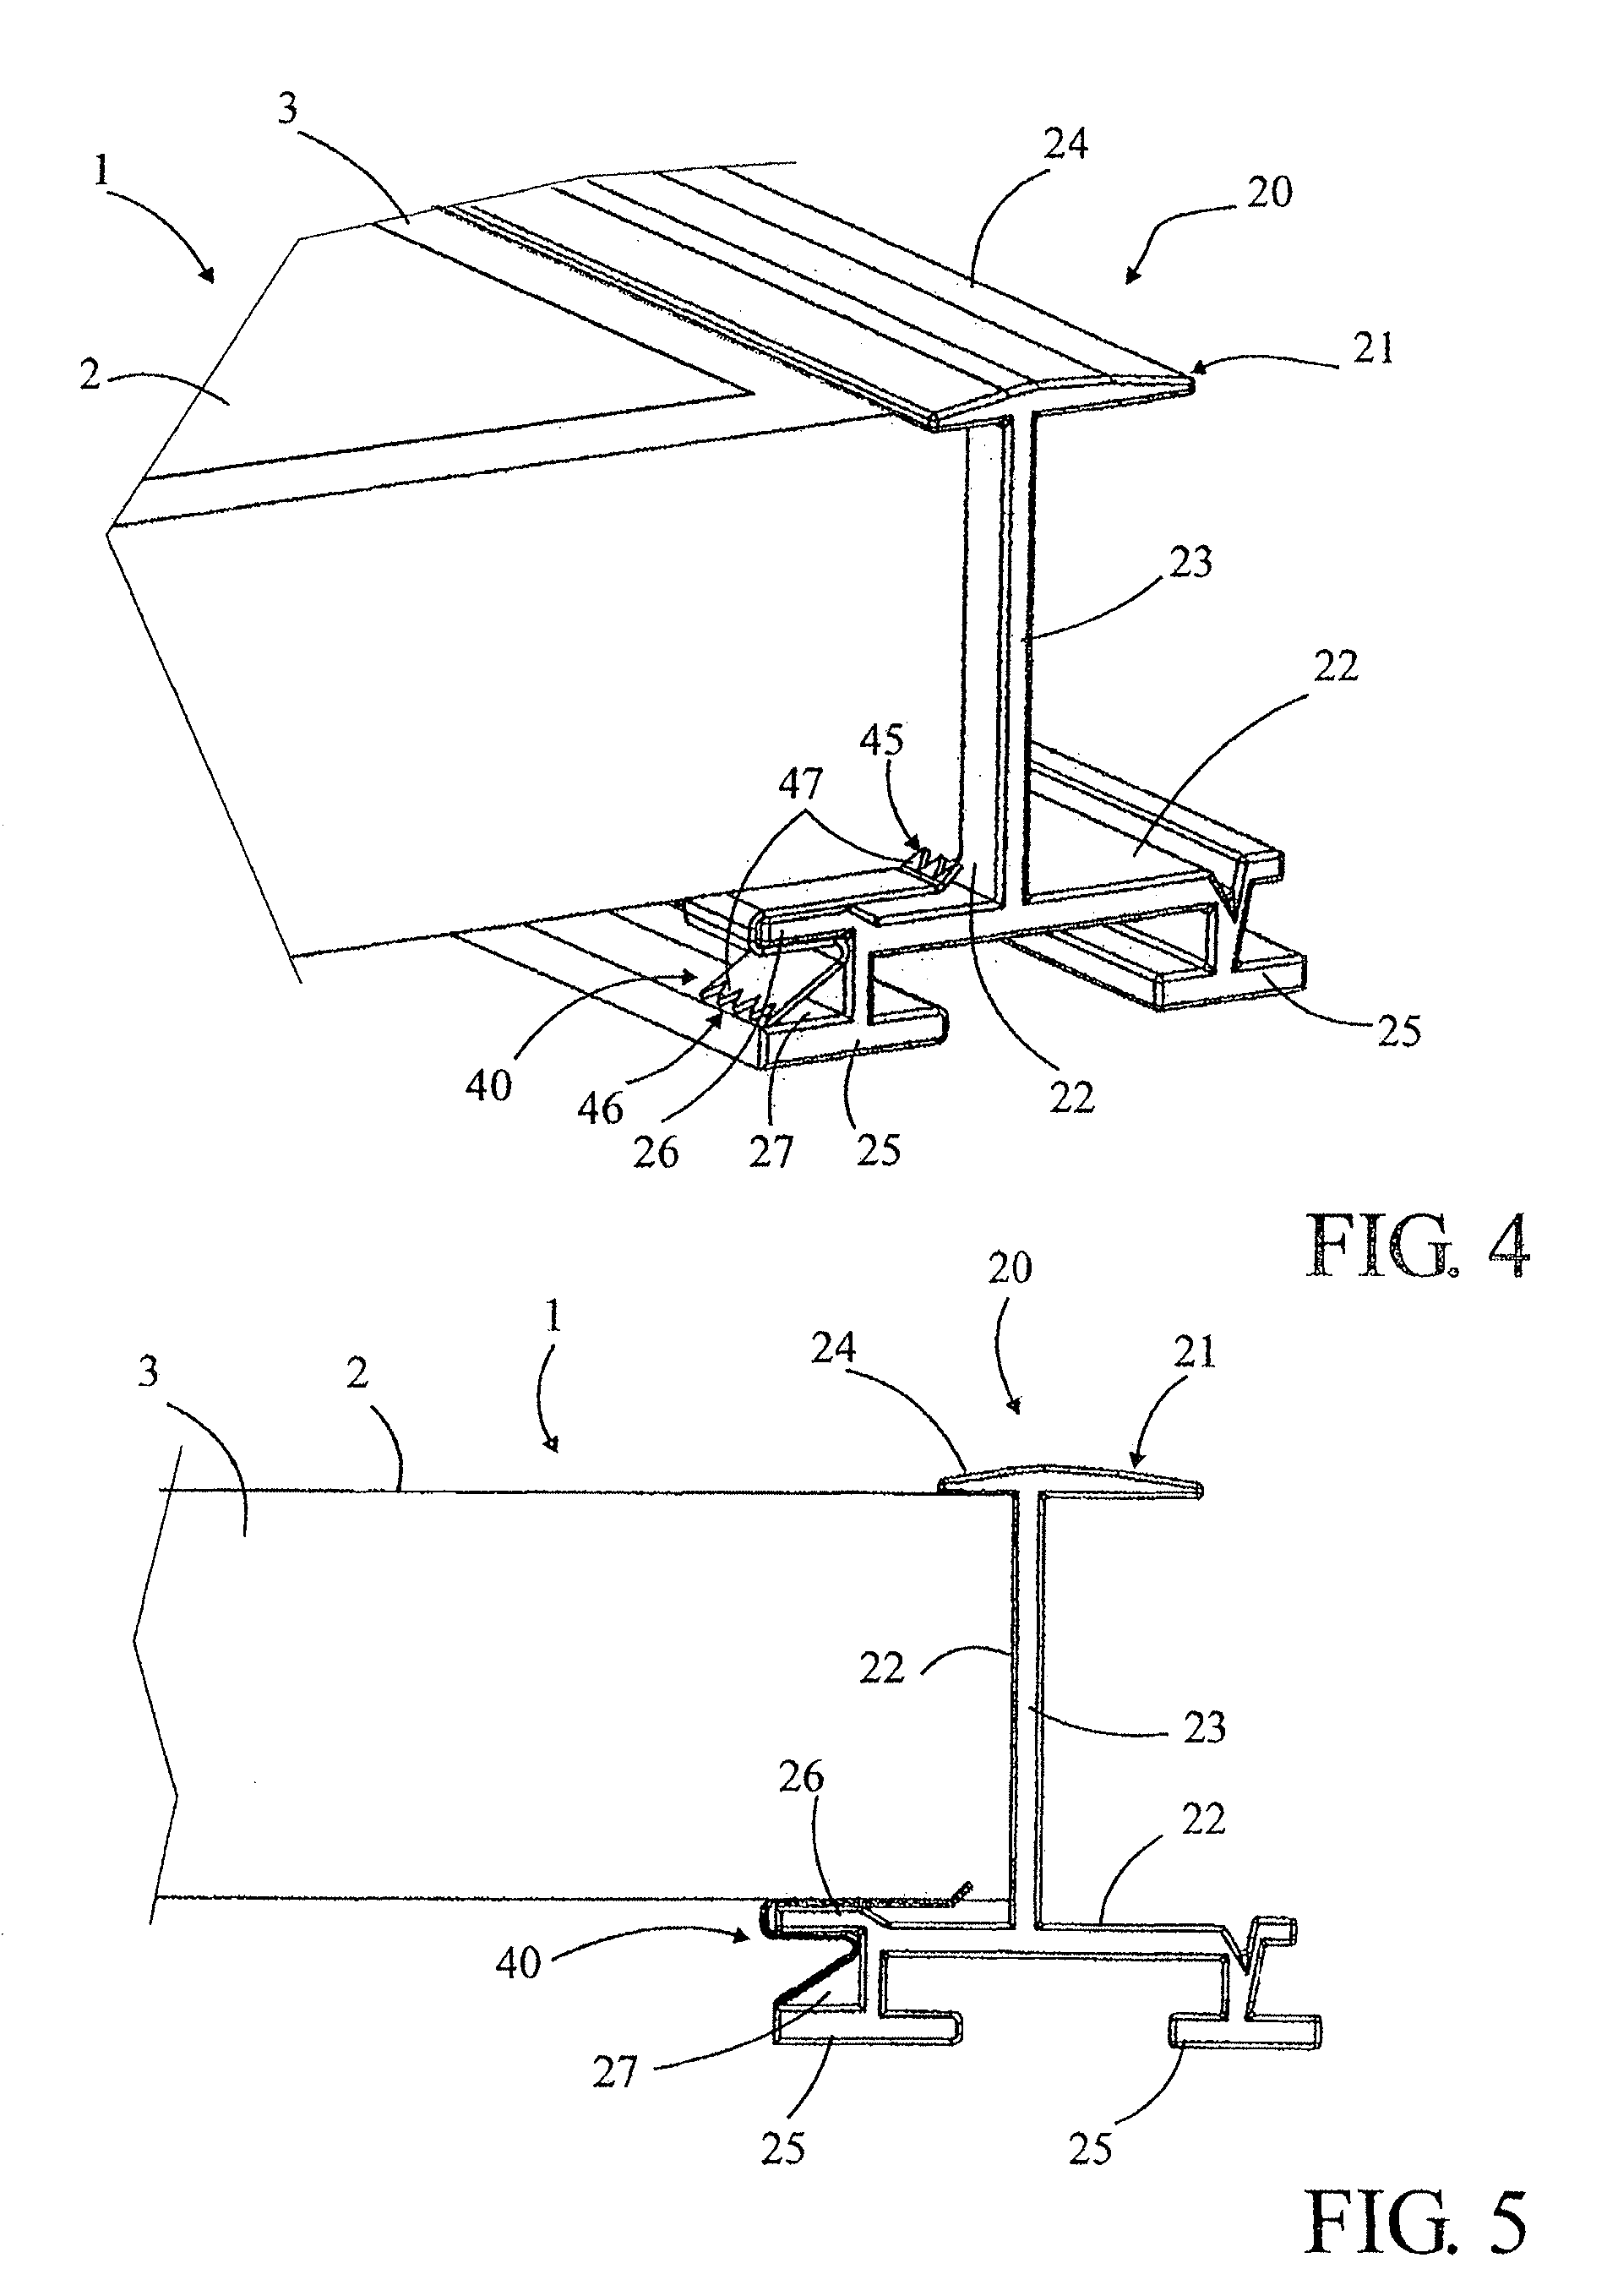 Separate connection device for grounding electrical equipment comprising a plurality of separate electrical components